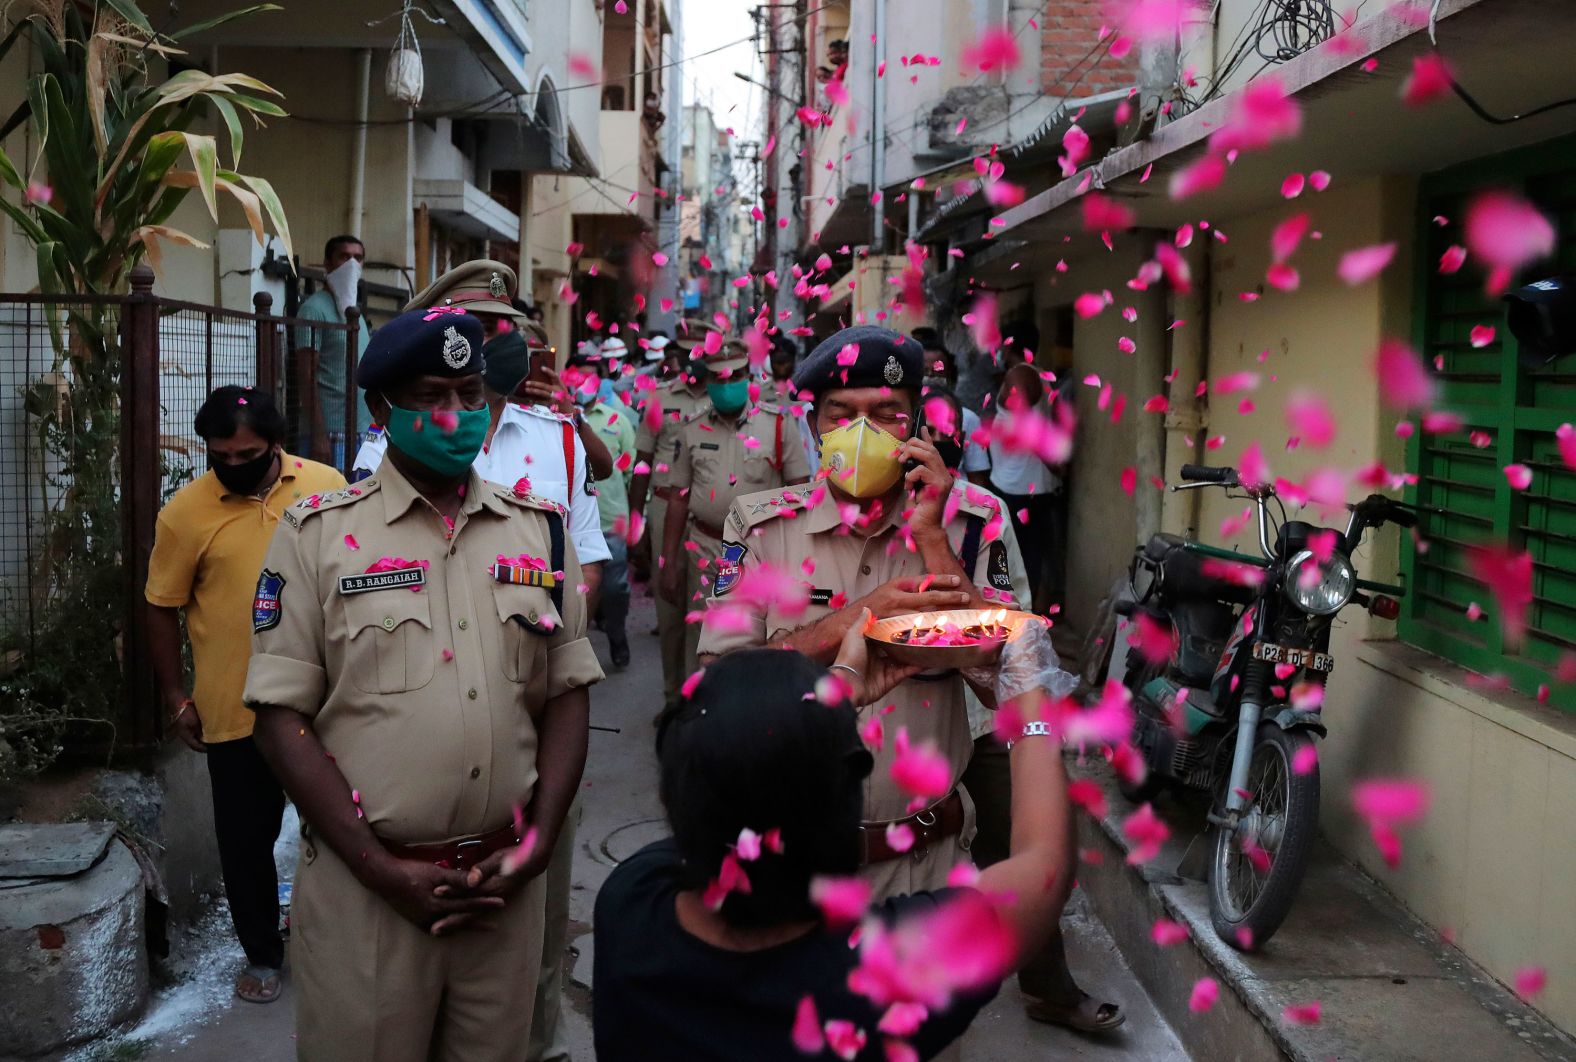 Police officers are also among the front-line workers being thanked. Here, they are showered with rose petals in Hyderabad, India, on April 19.